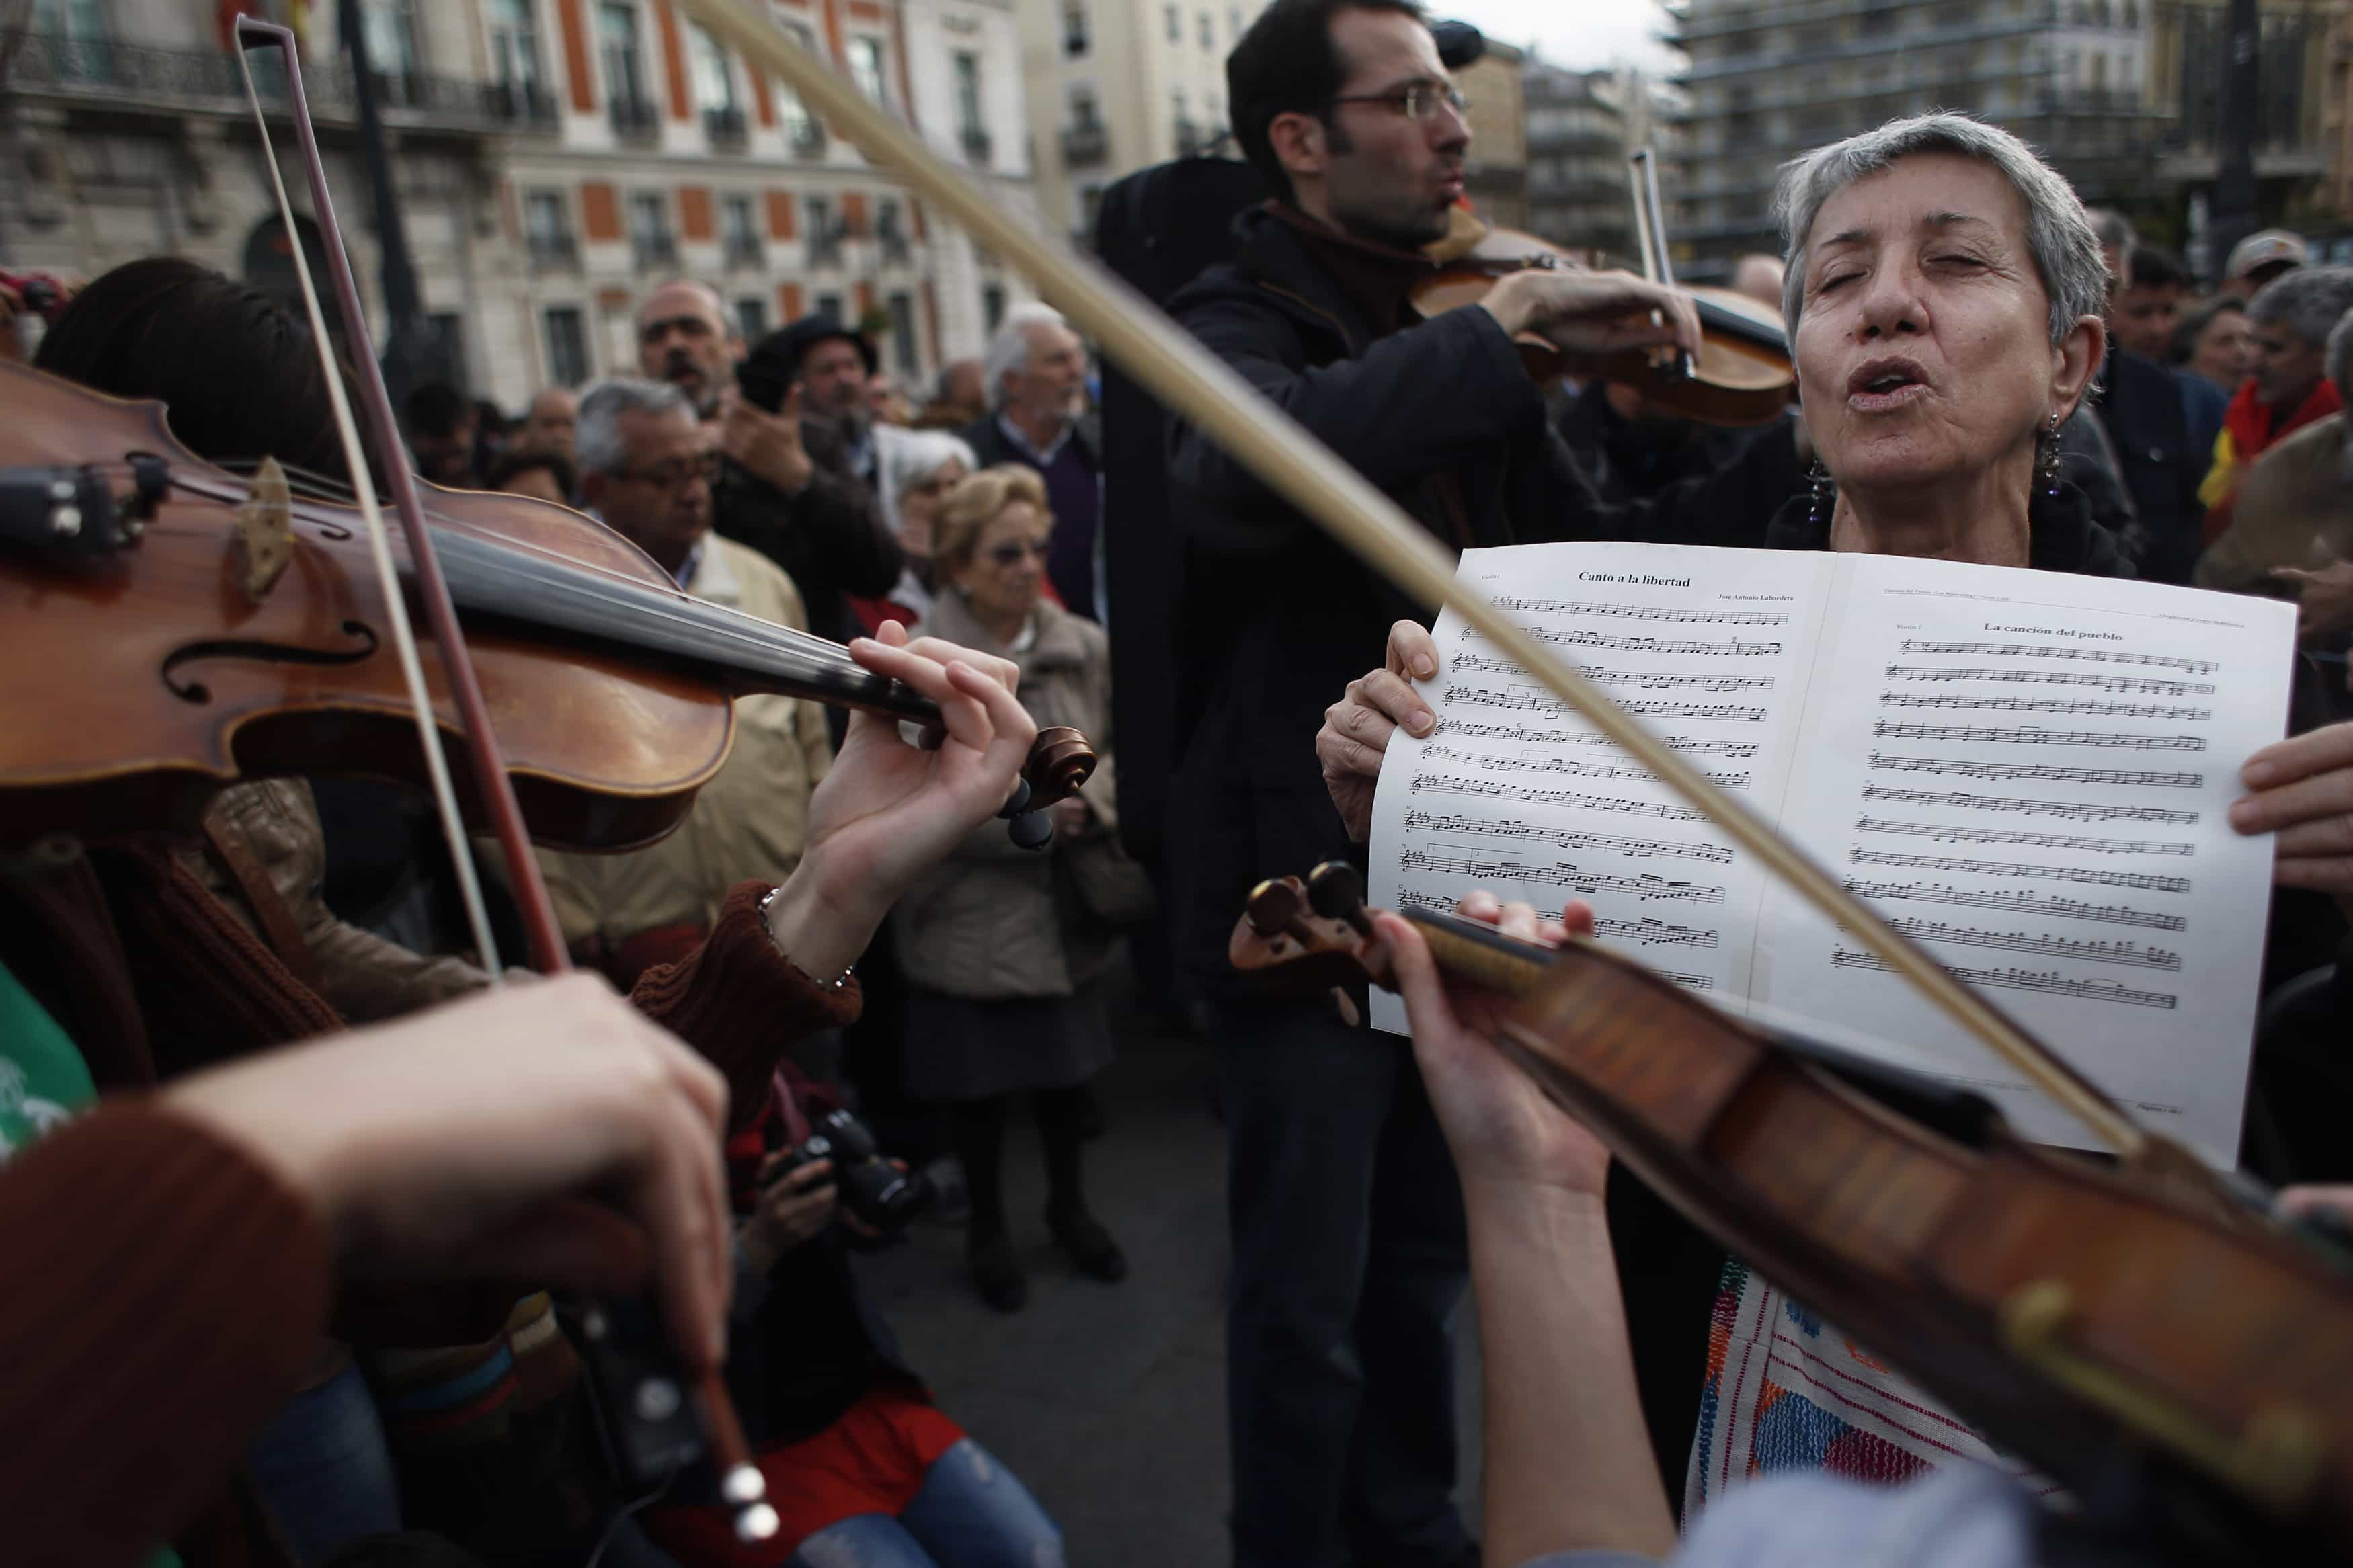 Demonstrators play music during a gathering to mark the second anniversary of the 15M movement at Madrid's landmark Puerta del Sol Square May 15, 2013, REUTERS/Susana Vera